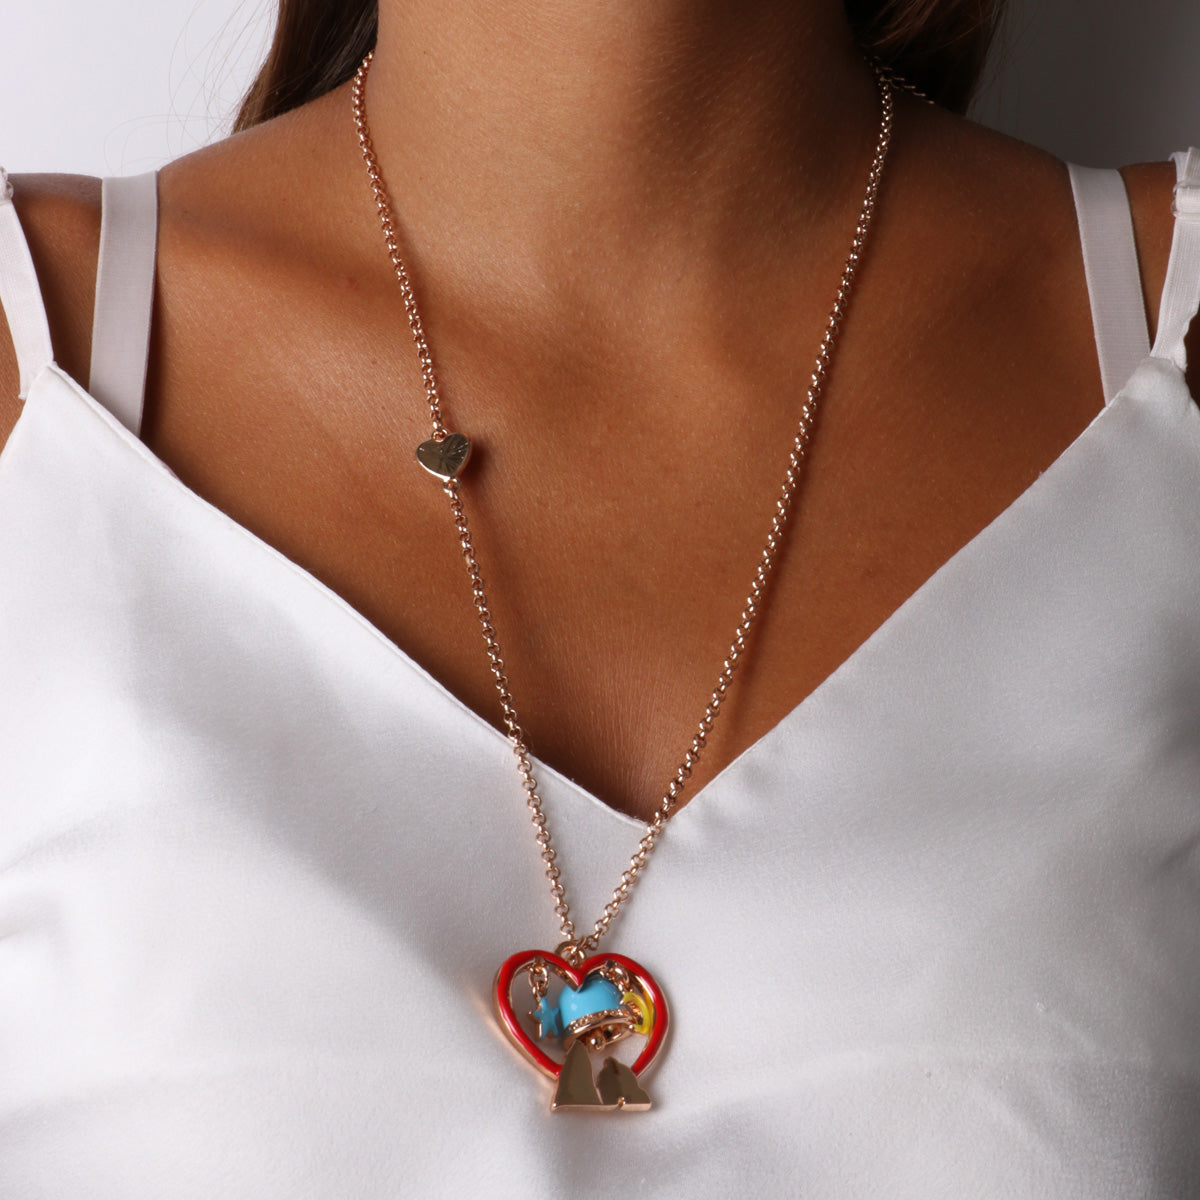 Metal necklace with star, moon and faraglioni inside a heart and borcapa charms